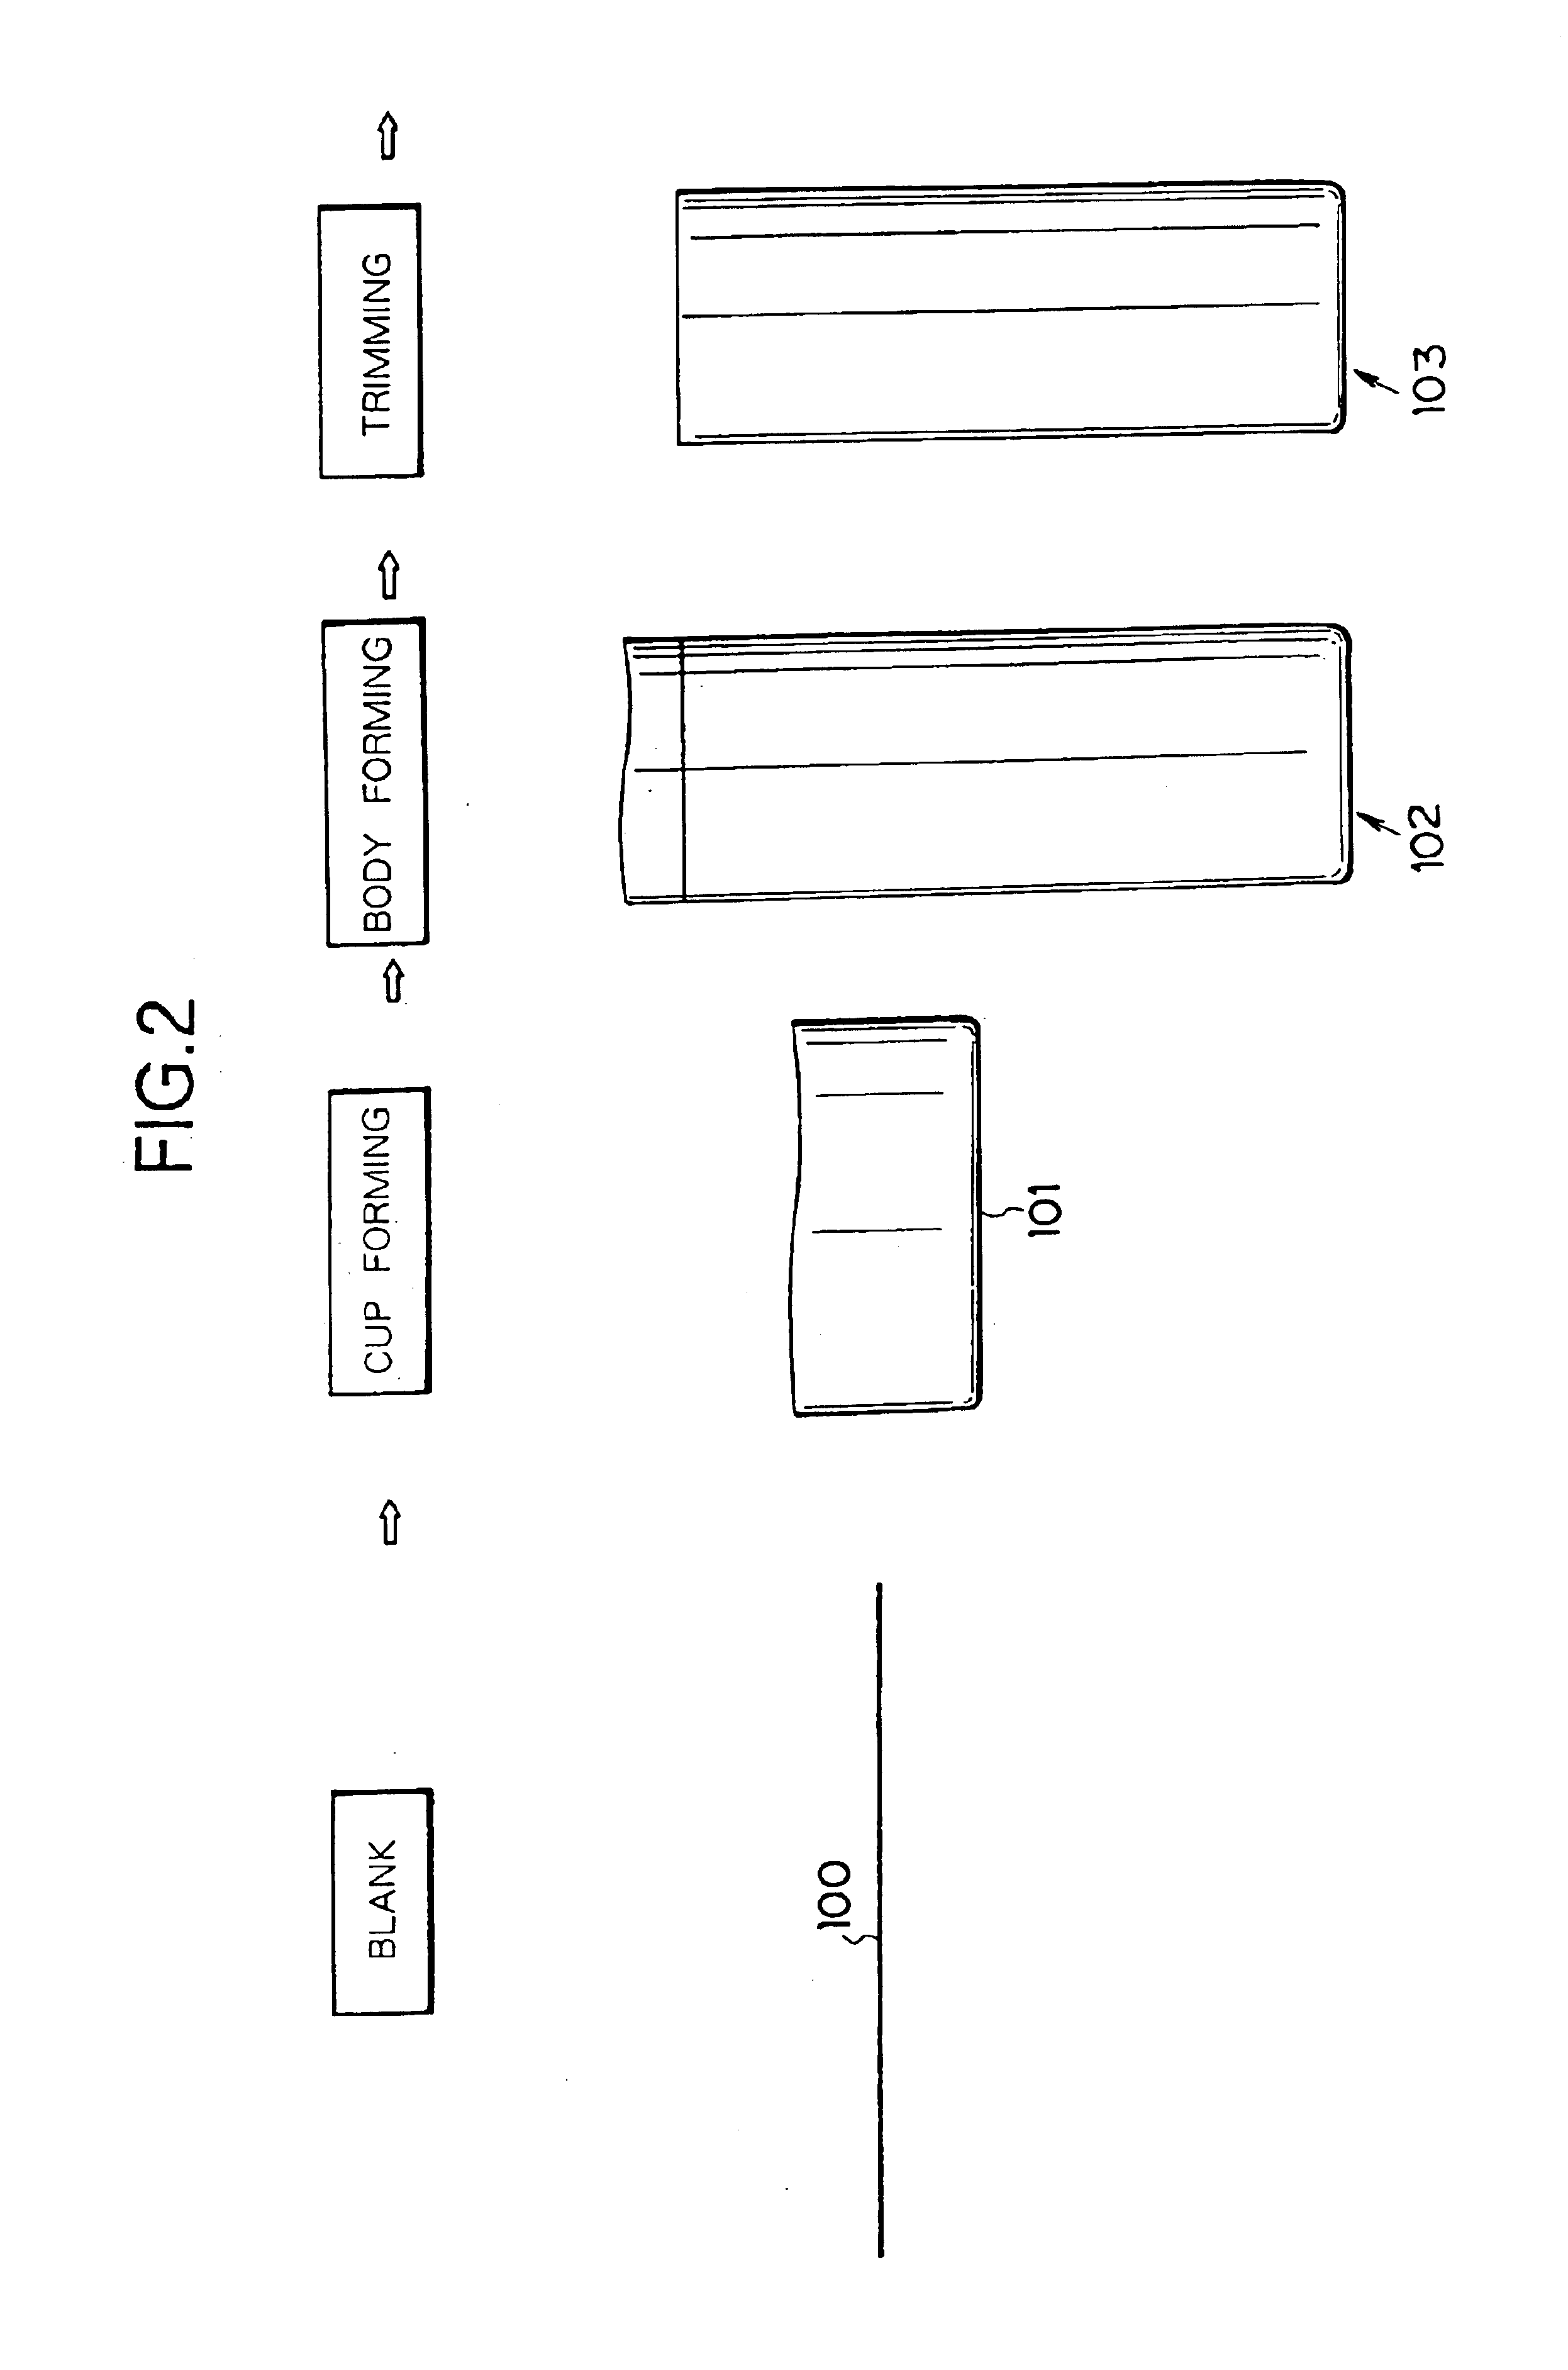 Bottle-shaped can manufacturing method